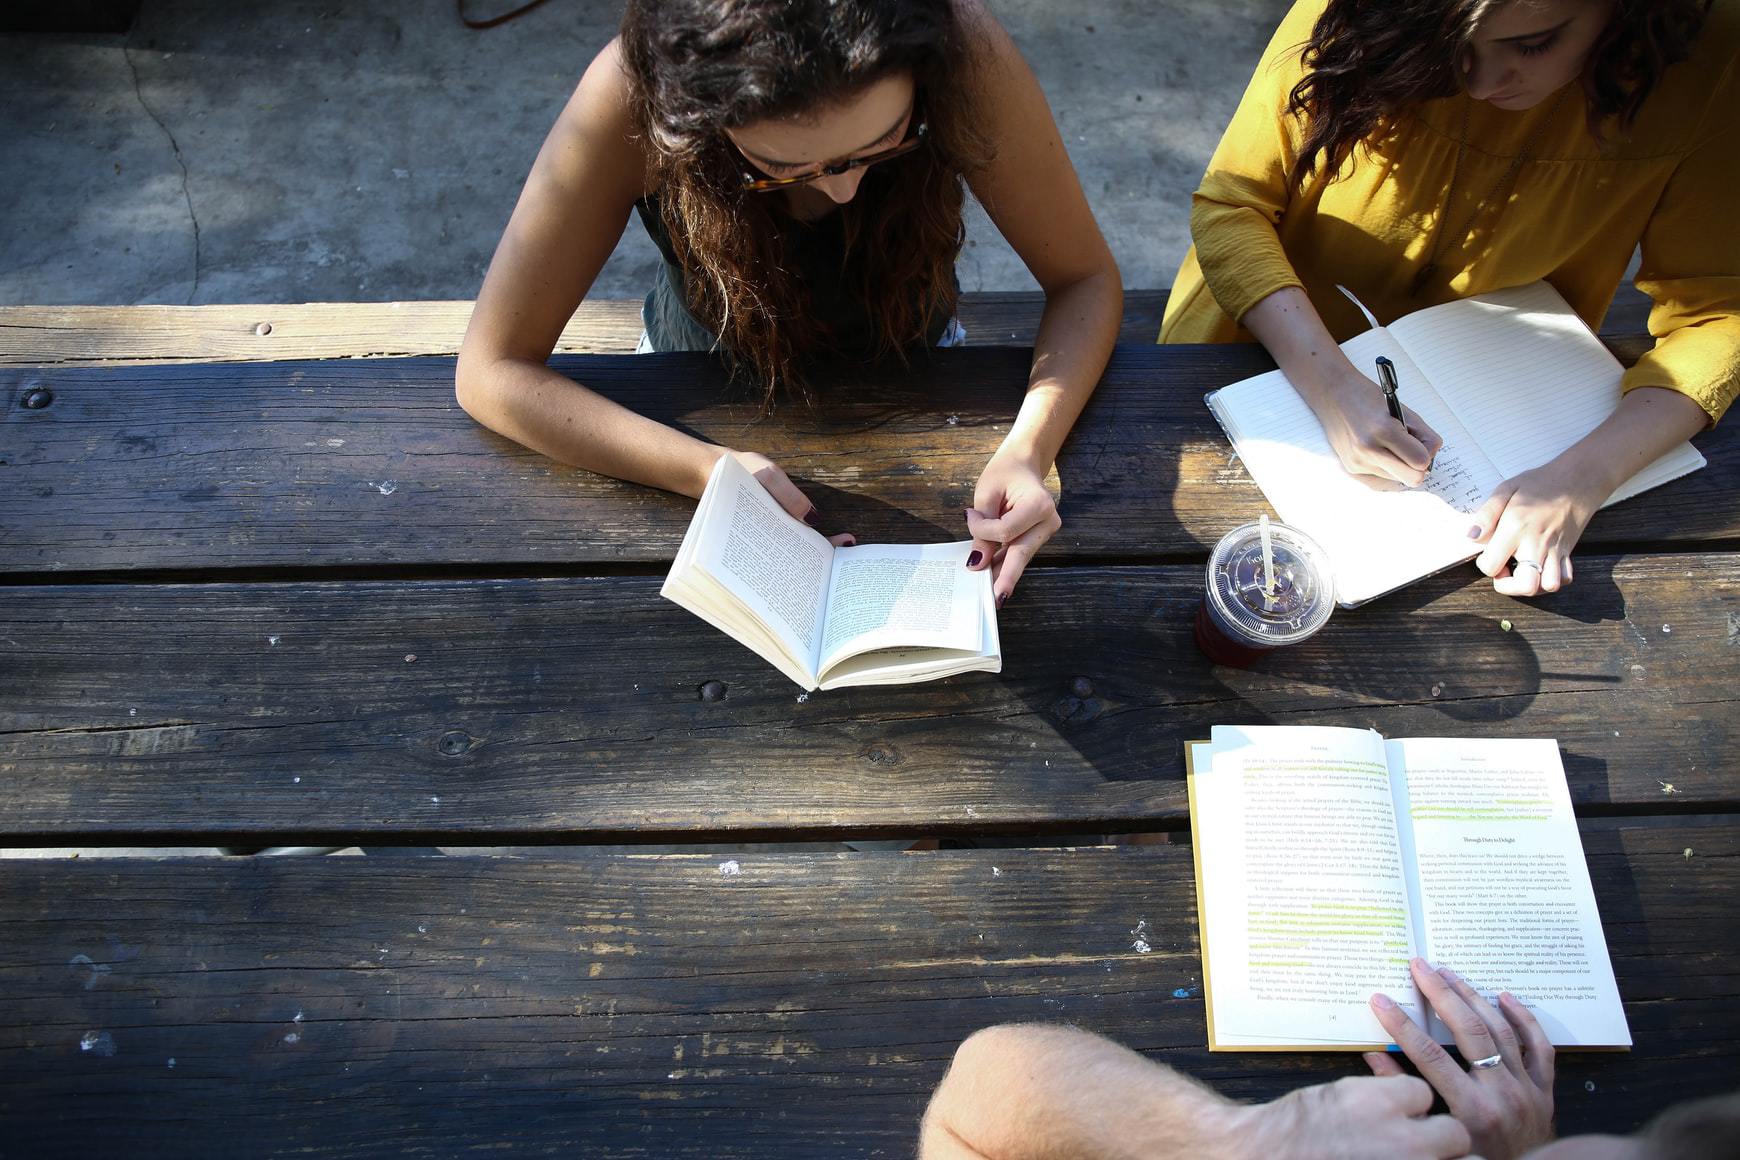 How To Start A Book Club In 7 Easy Steps